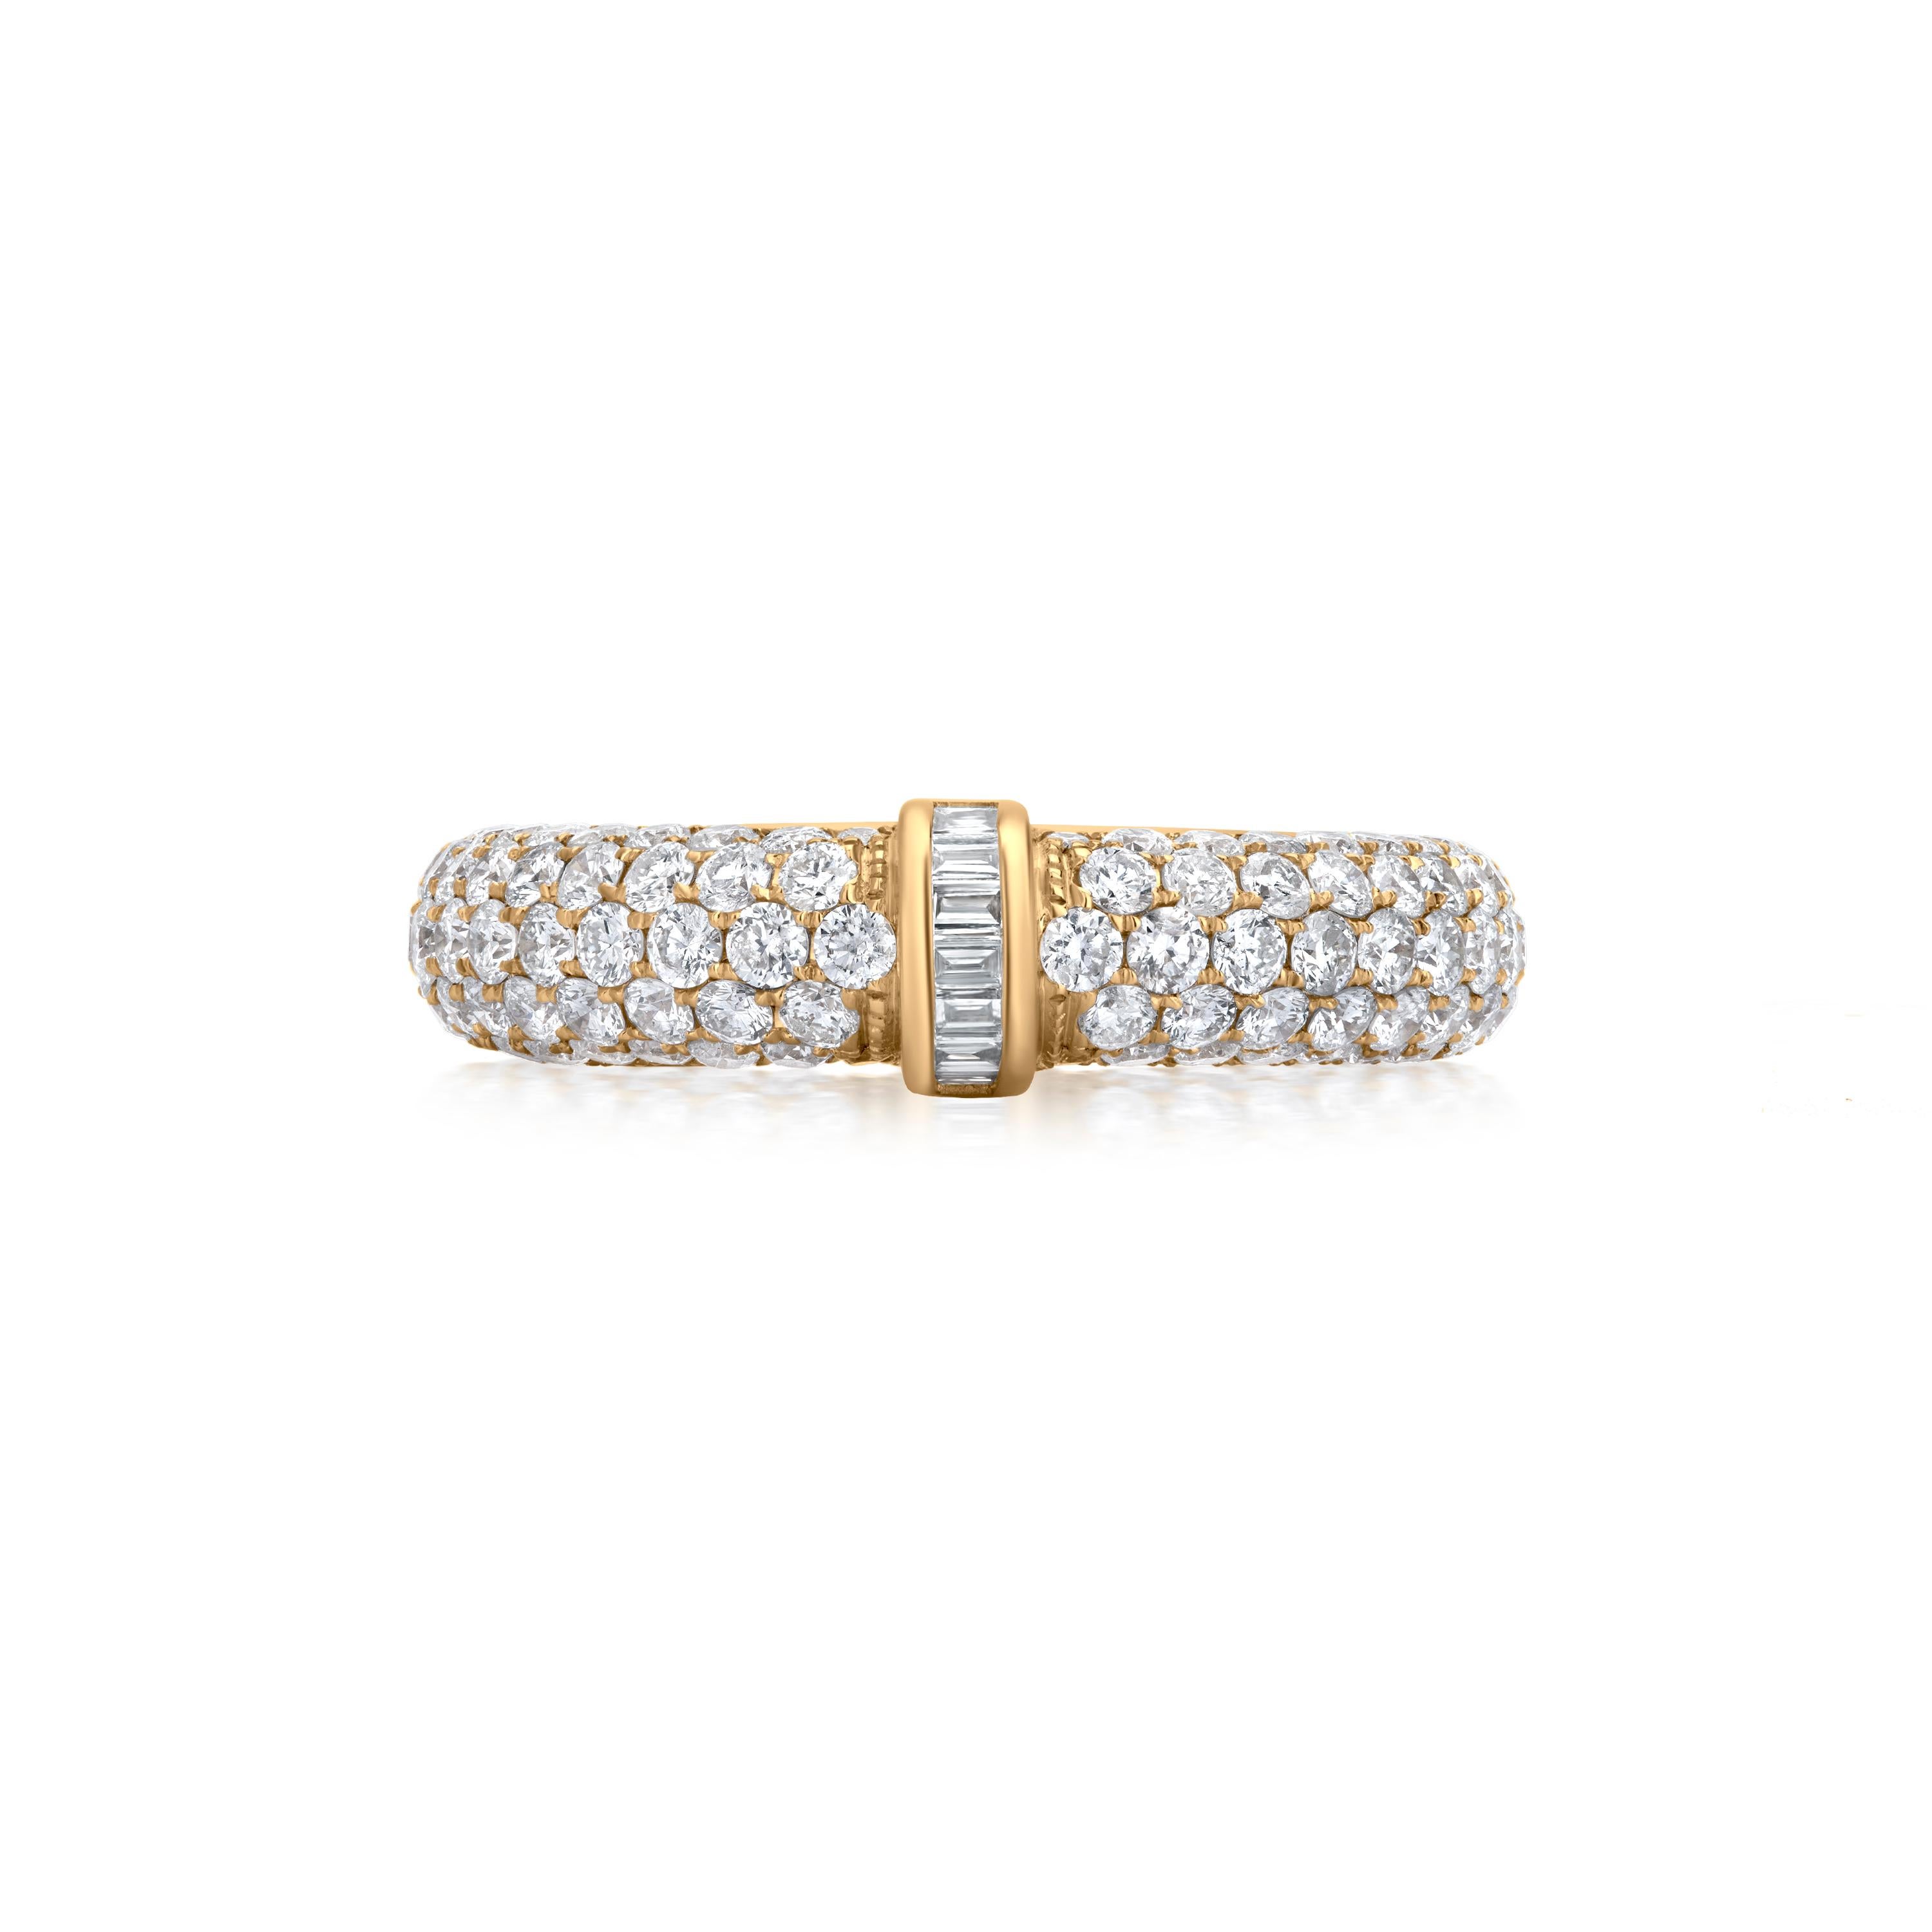 Display the utmost shine with this stunning diamond ring from Luxle. A channel of baguette diamonds is set in the middle of this 18K yellow gold diamond band ring. Rows of round pave diamonds are arranged in a border around the baguette diamonds in